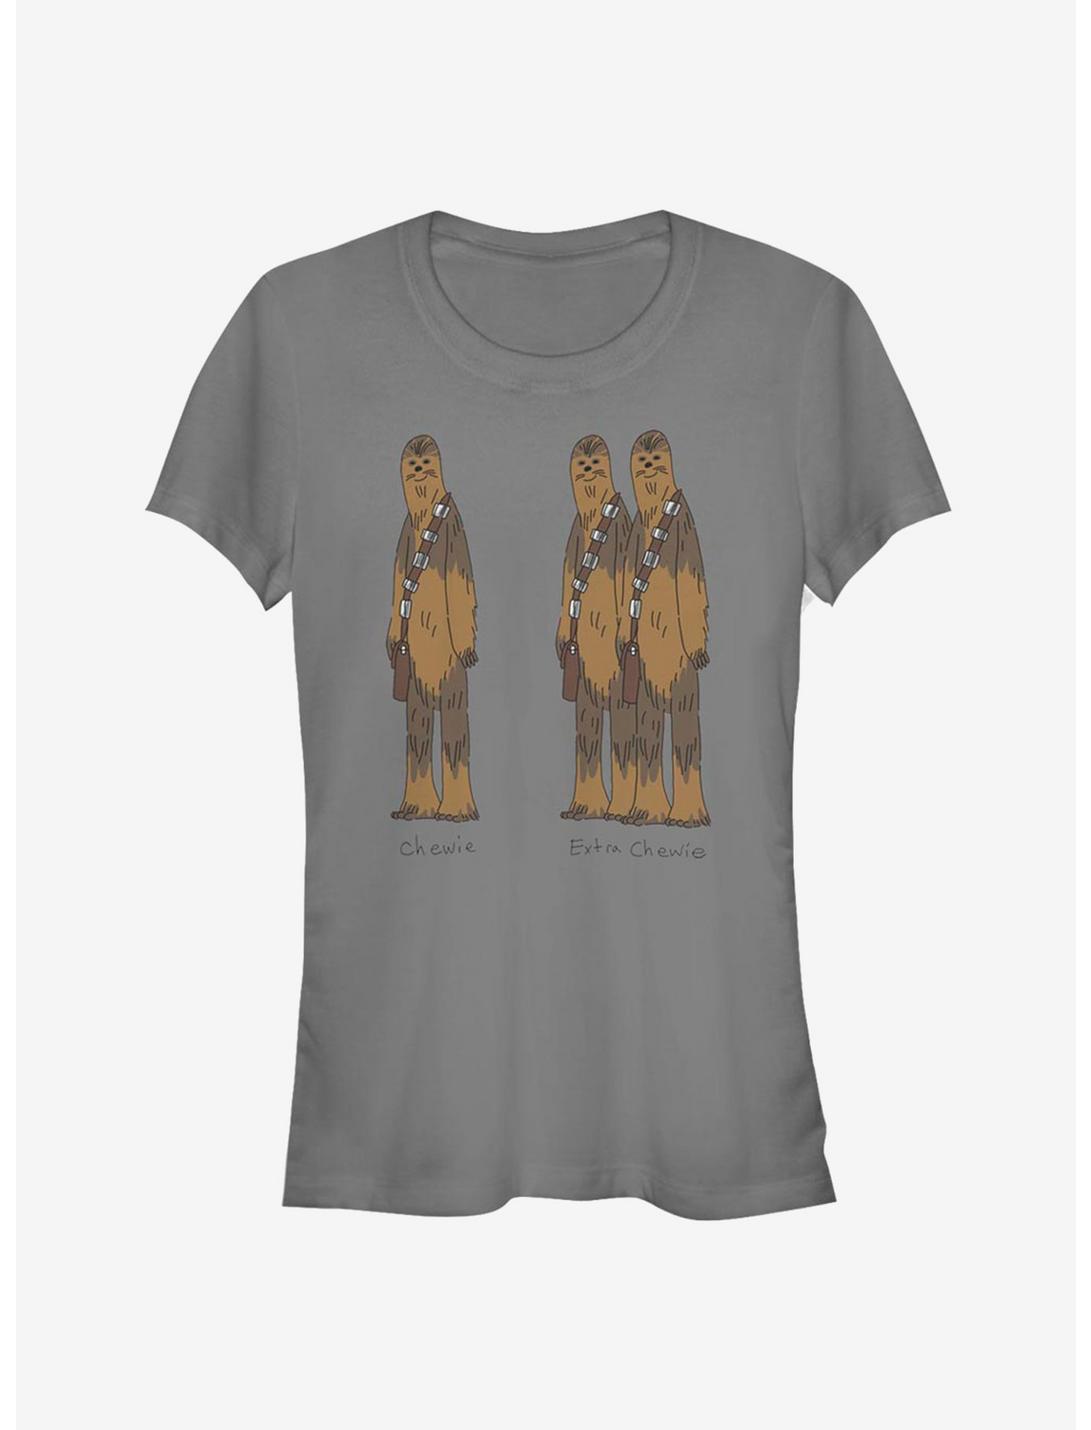 Star Wars Extra Chewie Girls T-Shirt, CHARCOAL, hi-res